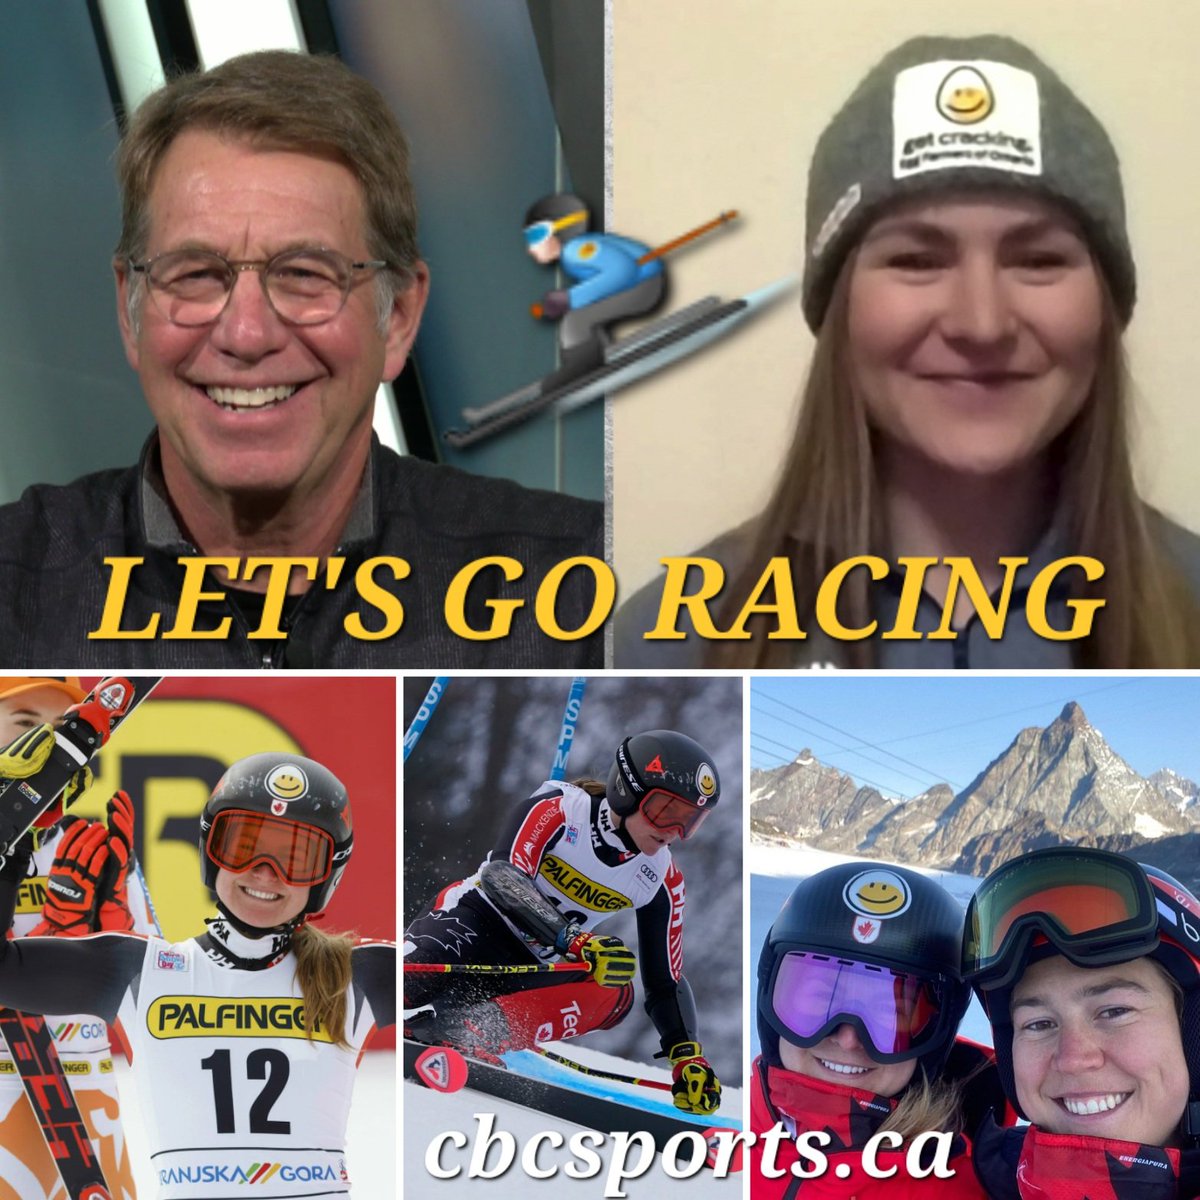 The White Circus is on! Women's GS @fisalpine World Cup opener in Austria SAT. Check out Episode #1 of 'Let's Go Racing' with 🇨🇦's @valeriegrenier7 cbcsports.ca youtu.be/sVevzI63OvY @cbc @cbcsports @CBCOlympics @Alpine_Canada @TeamCanada